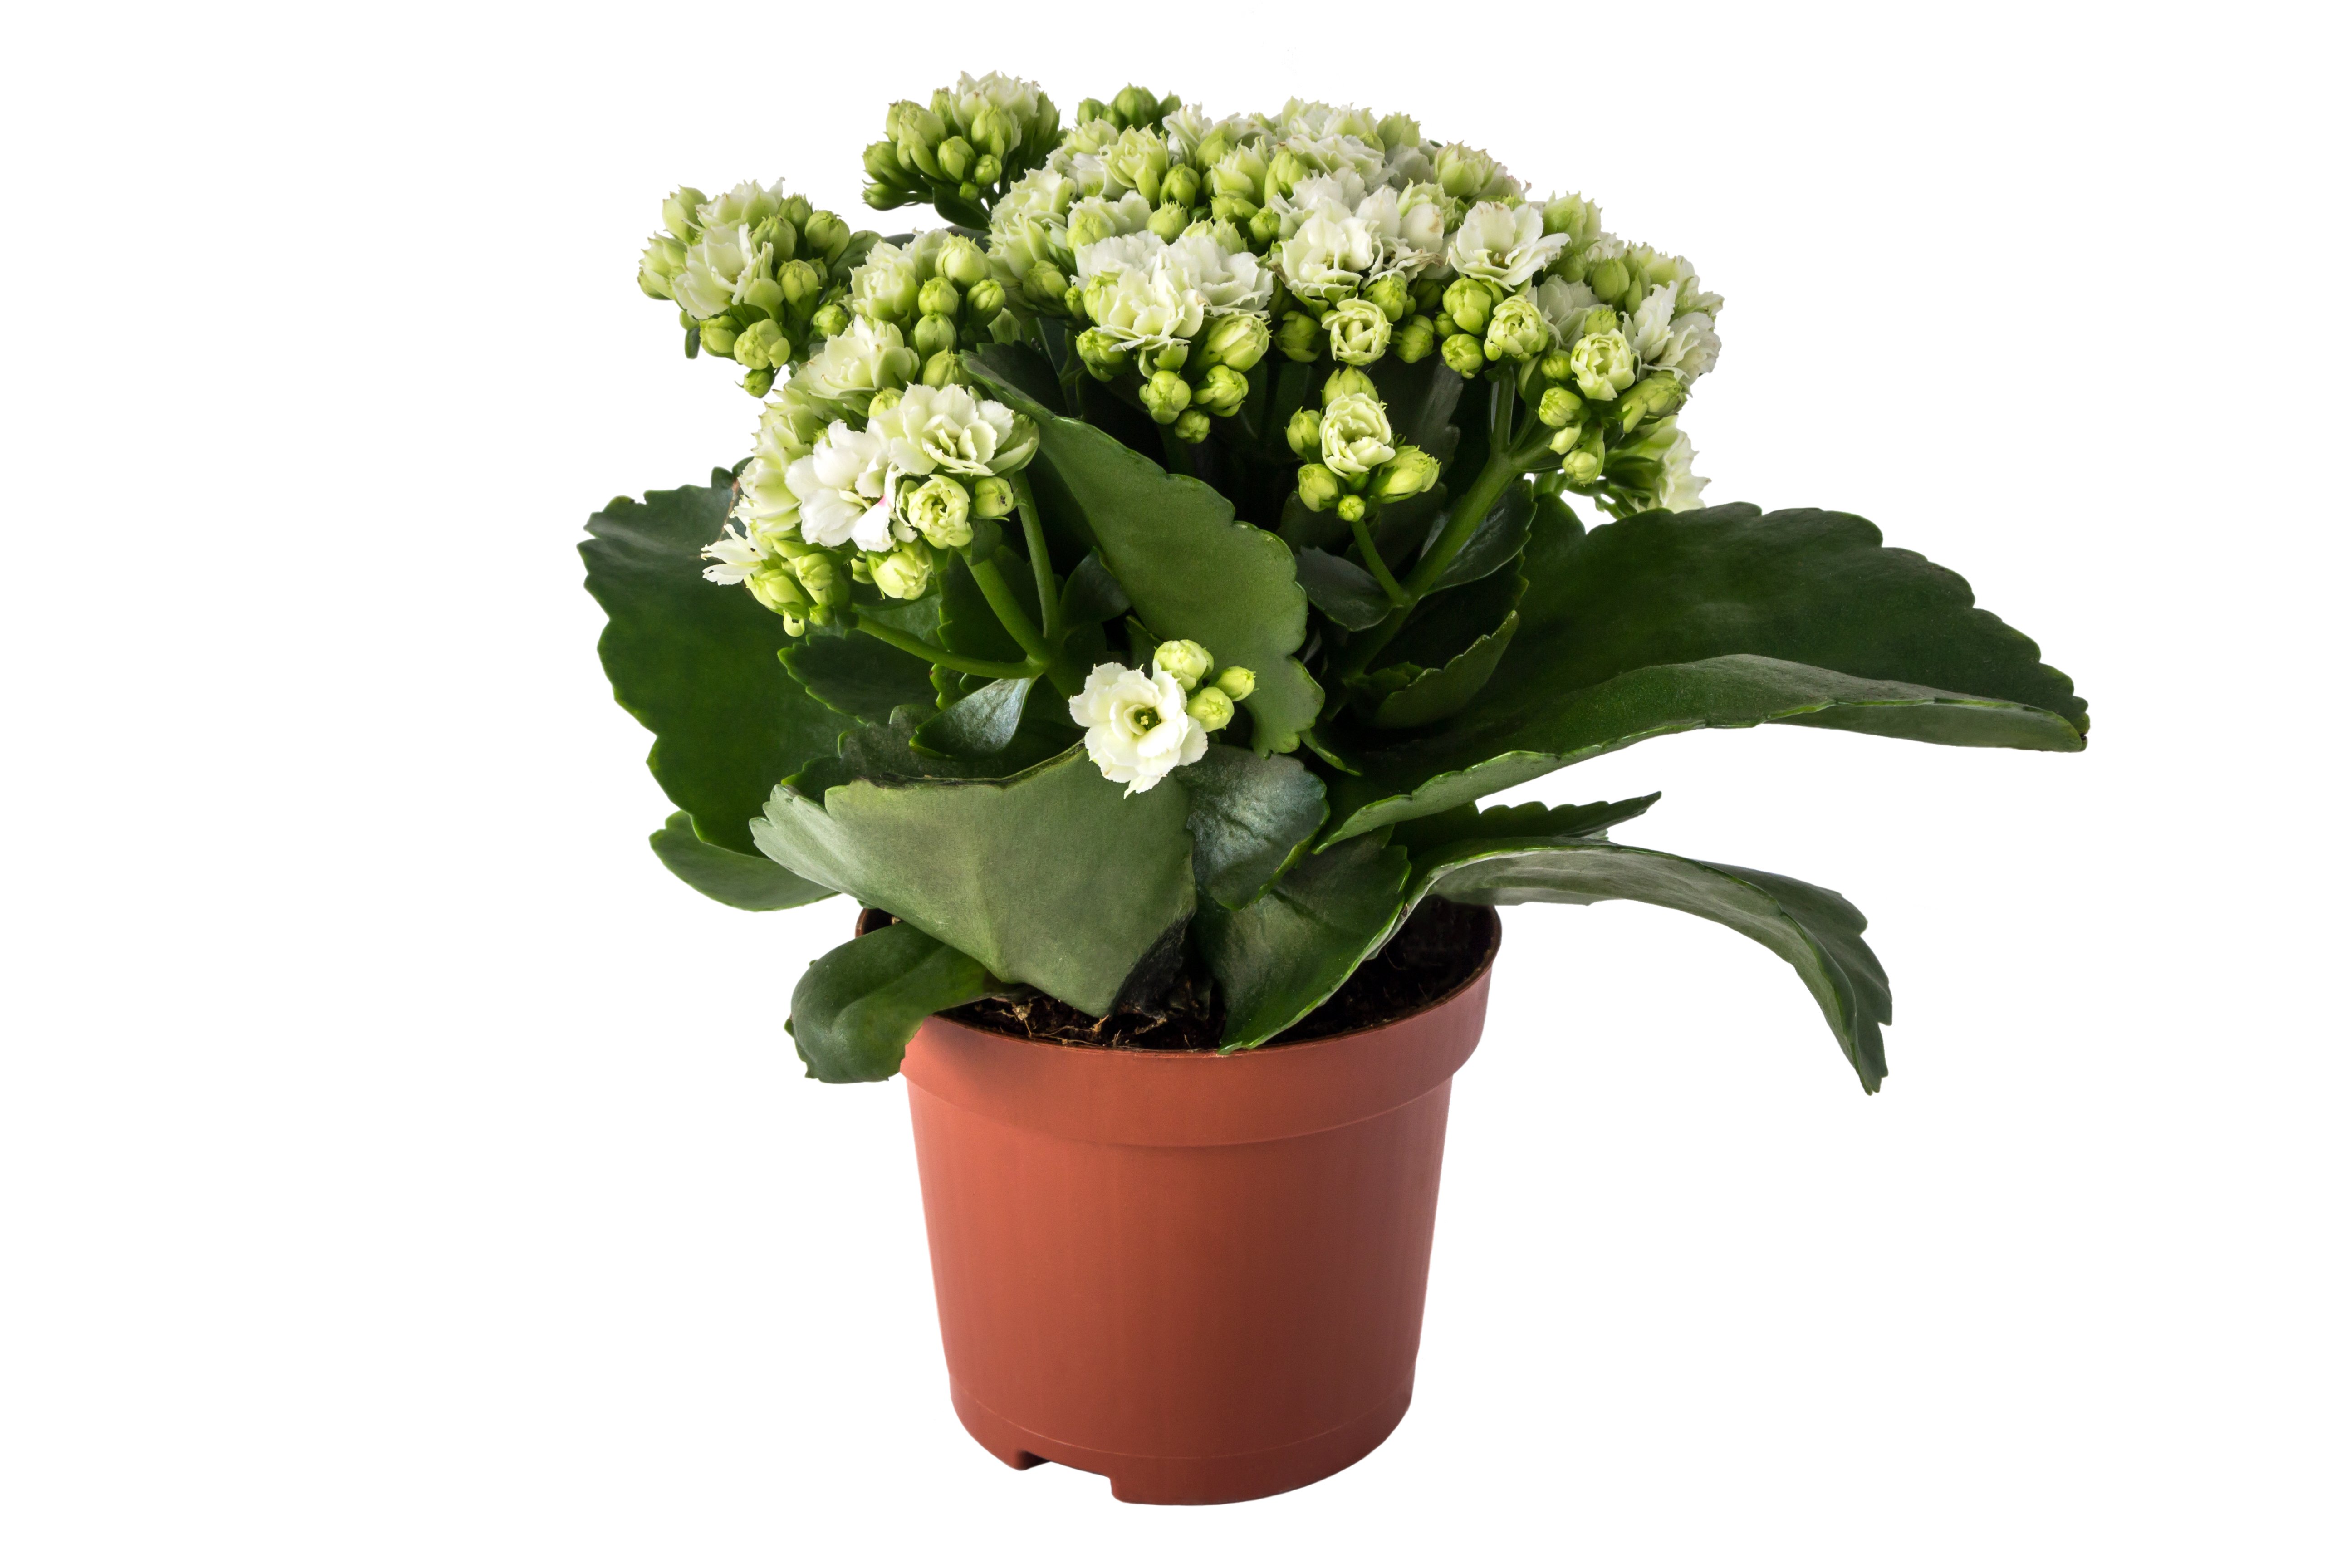 A kalanchoe calandiva with big green leaves in flowerpot isolated on white background